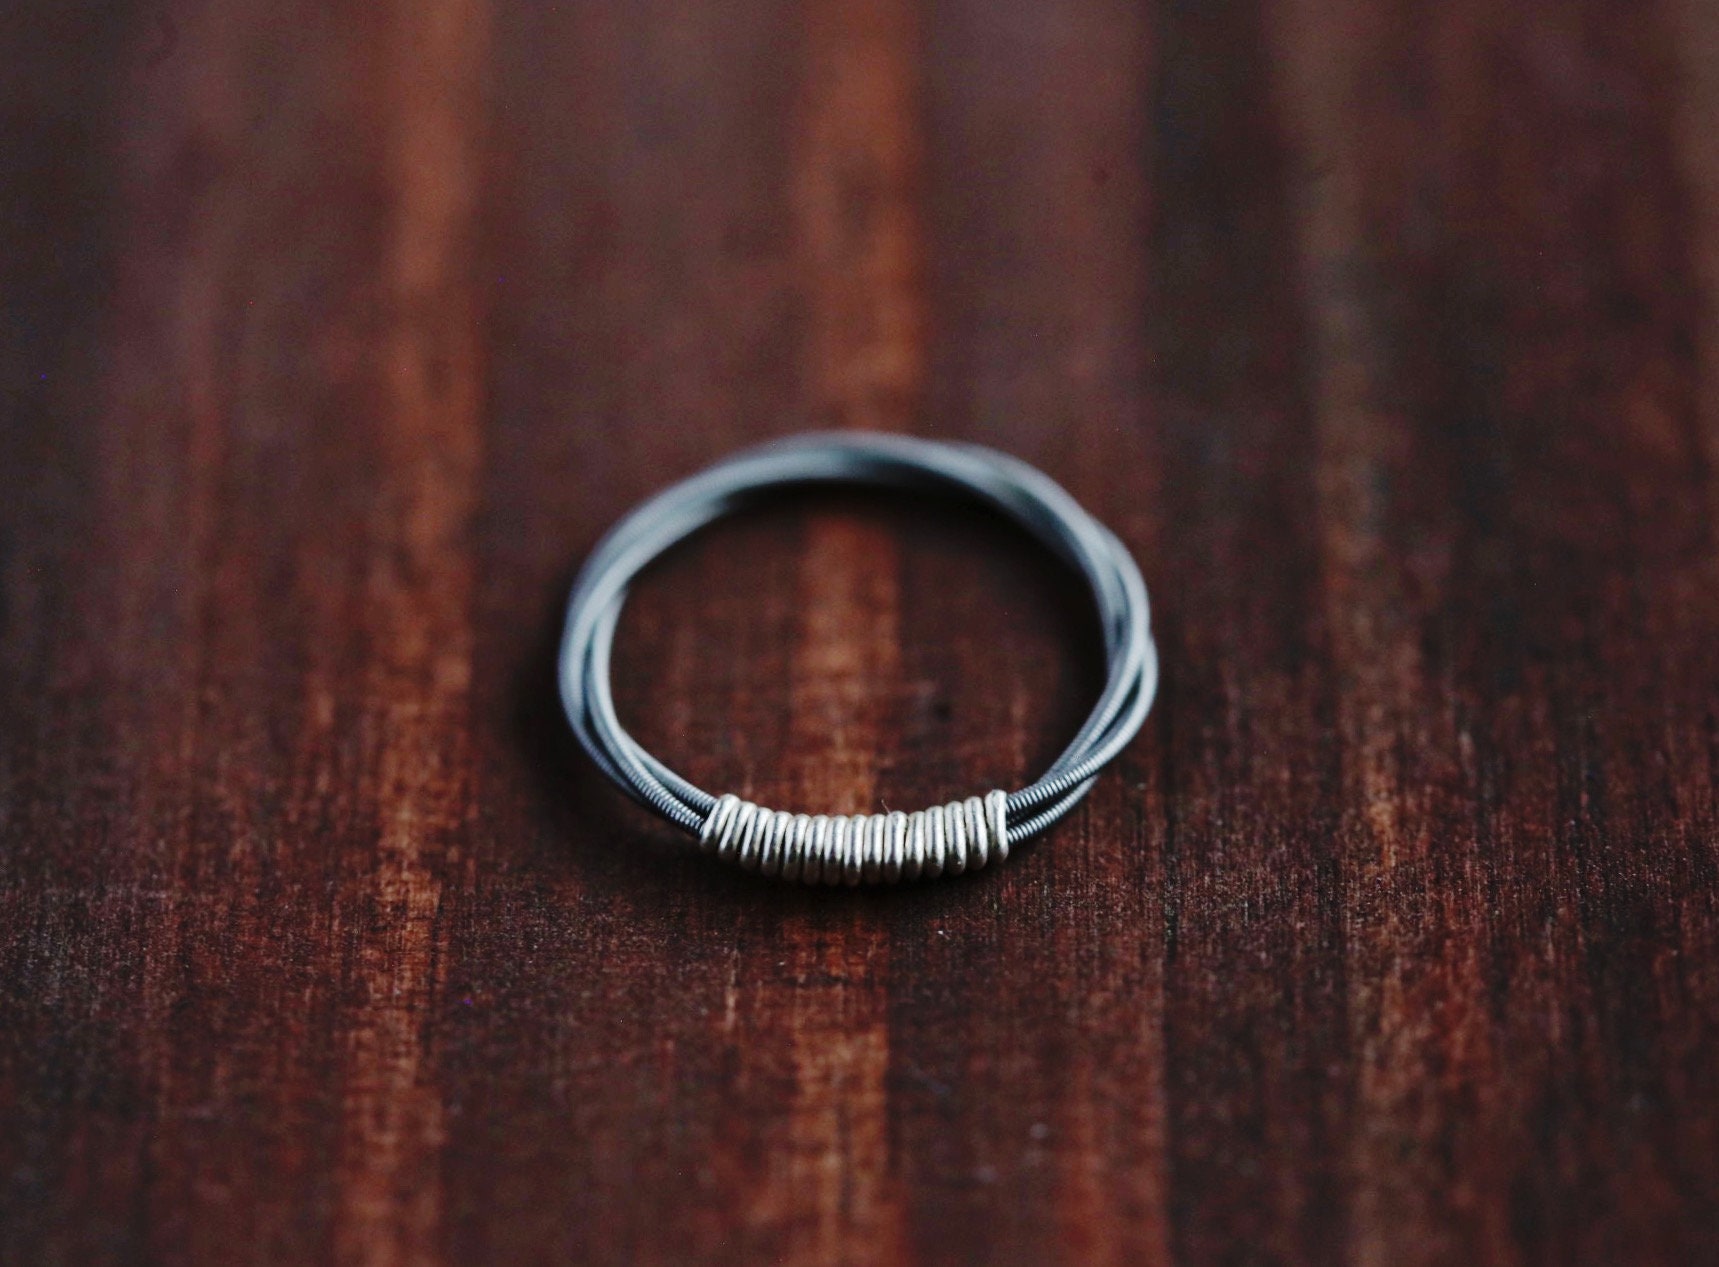 String Theory: Guitar String Jewelry